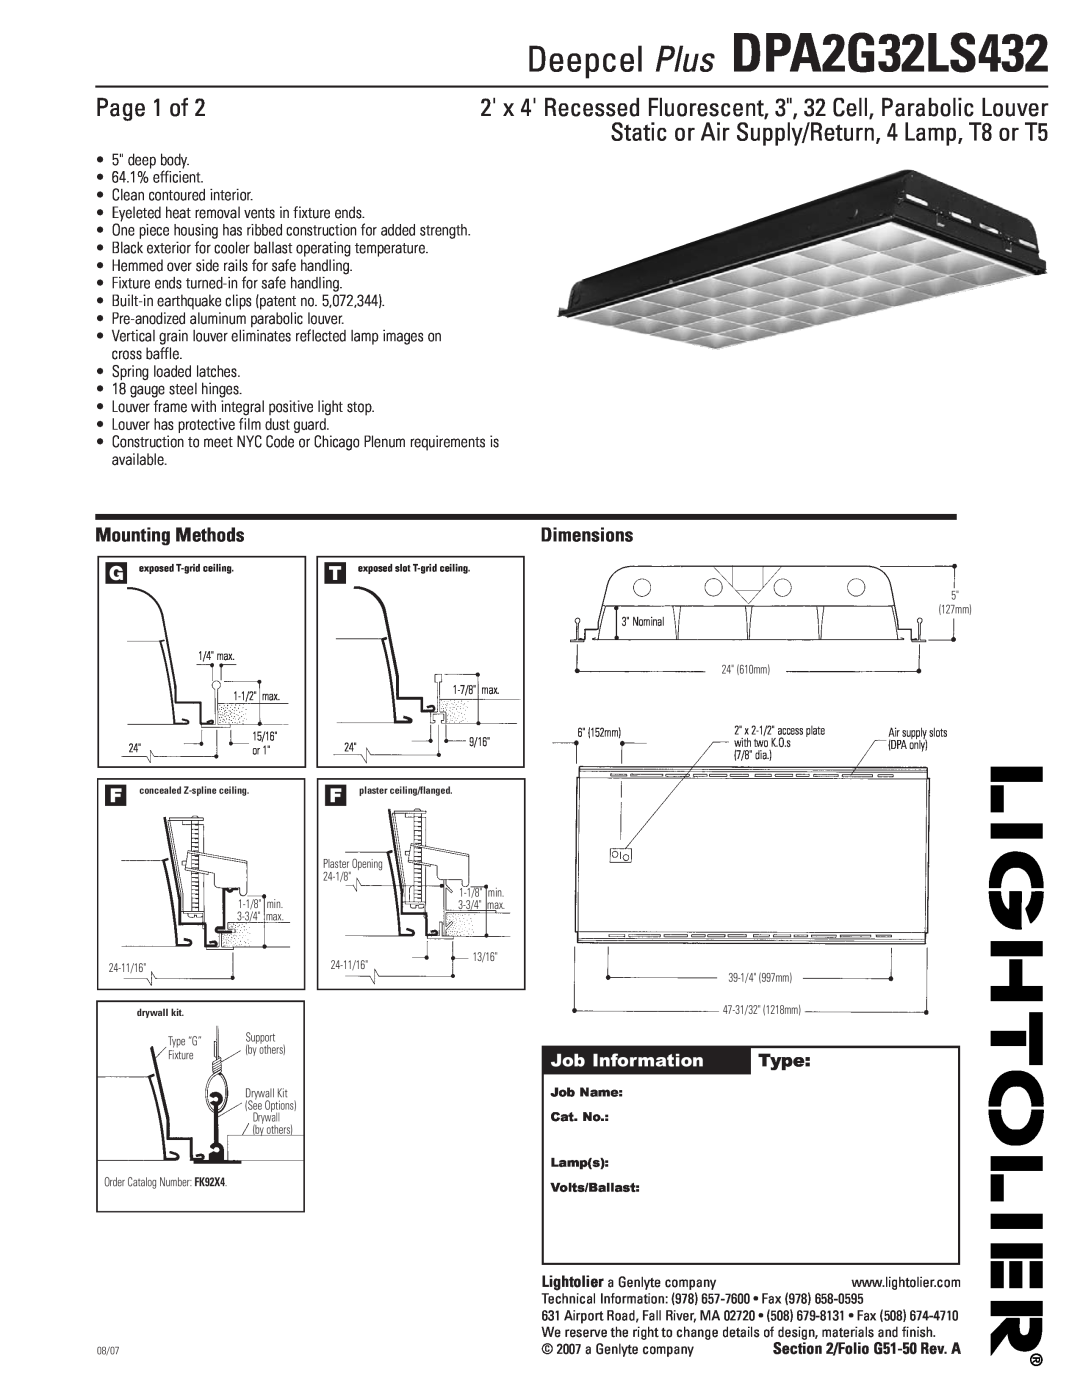 Lightolier DPA2G32LS432 dimensions Page 1 of, Static or Air Supply/Return, 4 Lamp, T8 or T5, Mounting Methods, Dimensions 